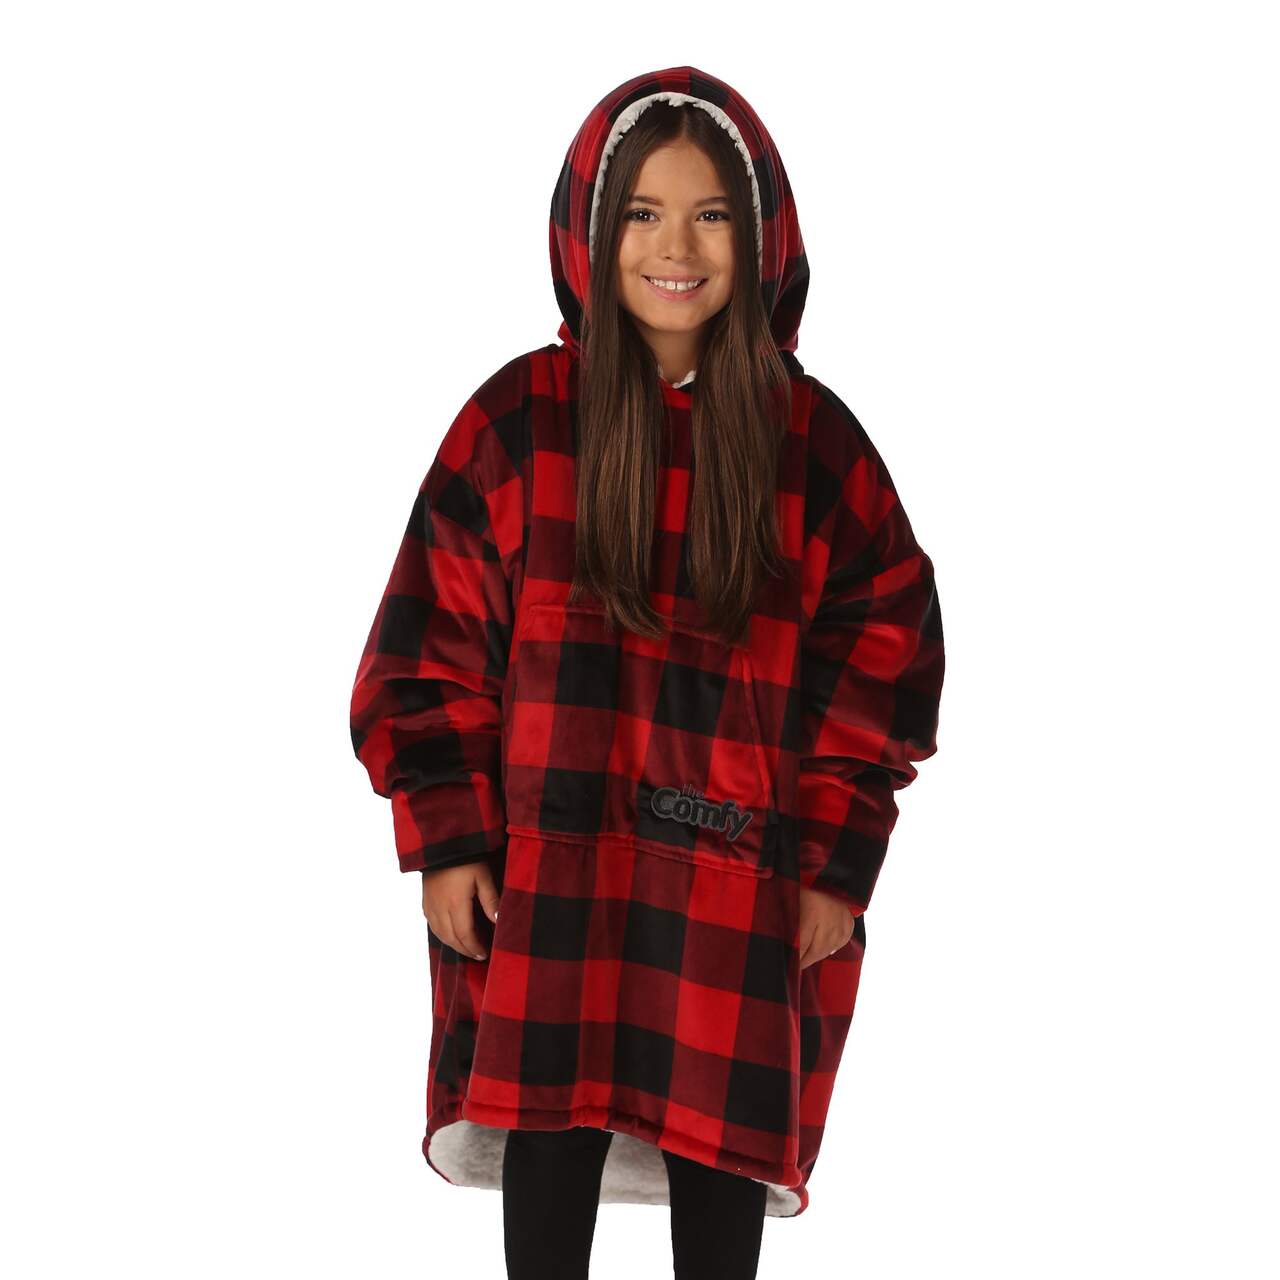 The Comfy® Original™ - The Blanket You Can Wear!